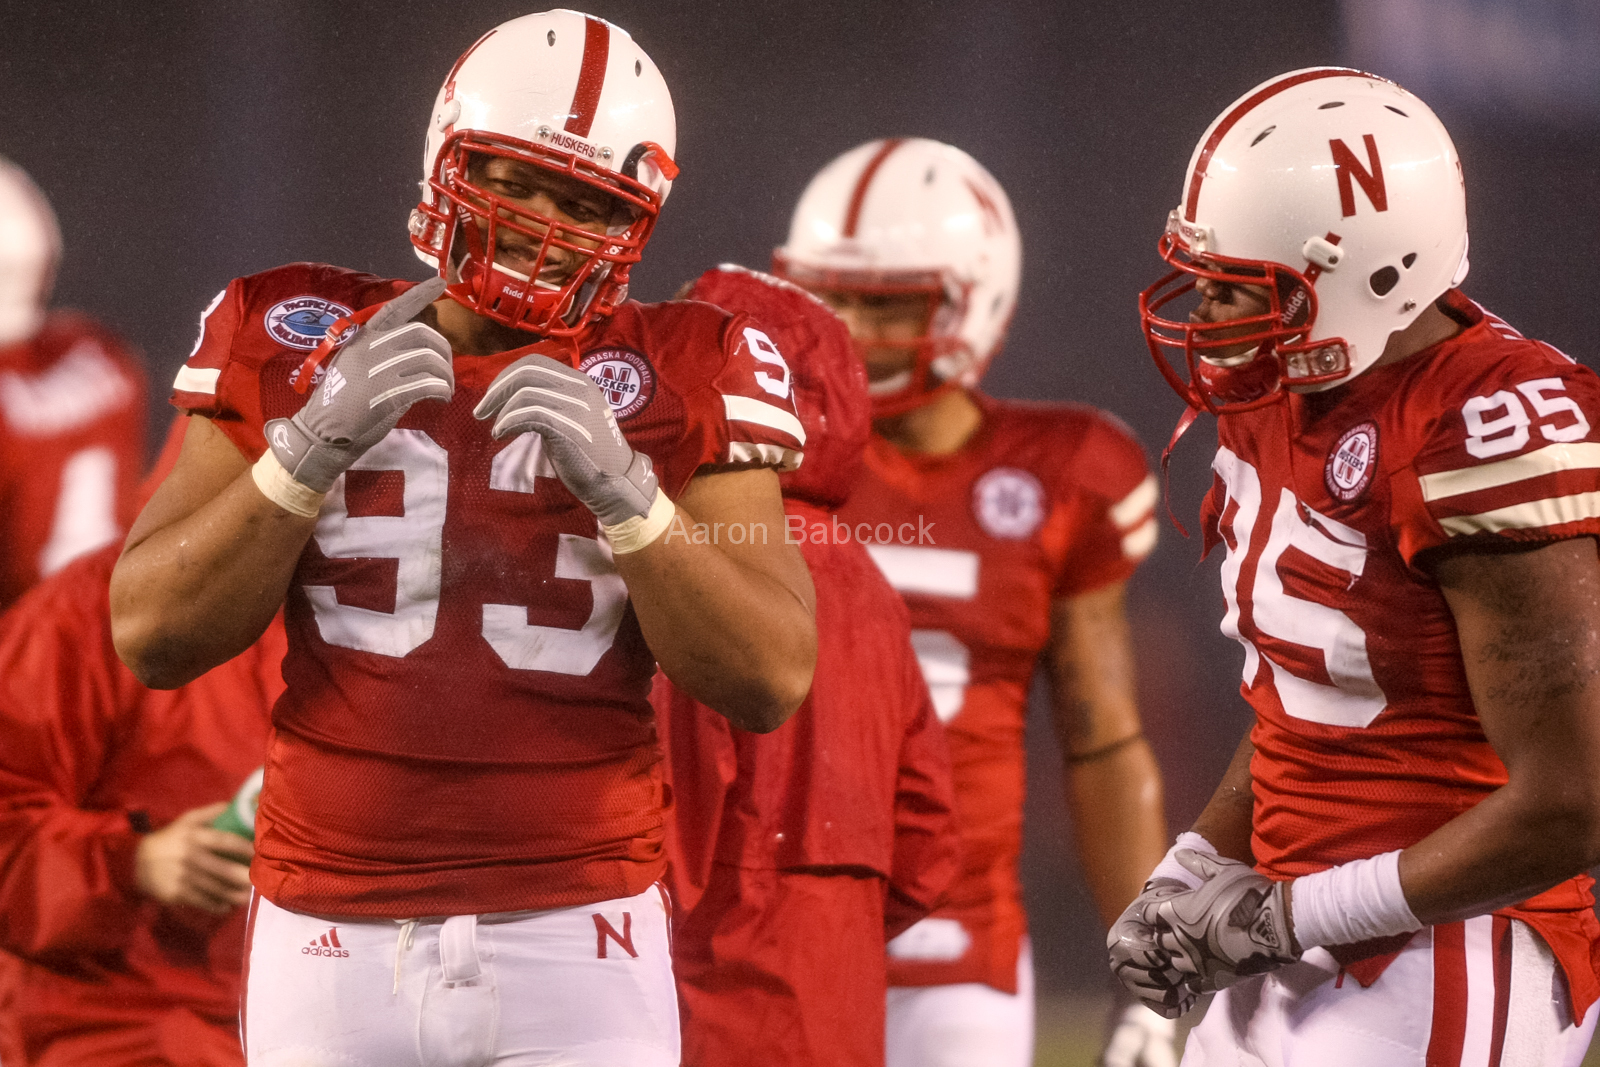 Ndamukong Suh laughes with Pierre Allen (95) during a 33-0 win over Arizona in the Holiday Bowl on Dec. 30, 2009. © Aaron Babcock